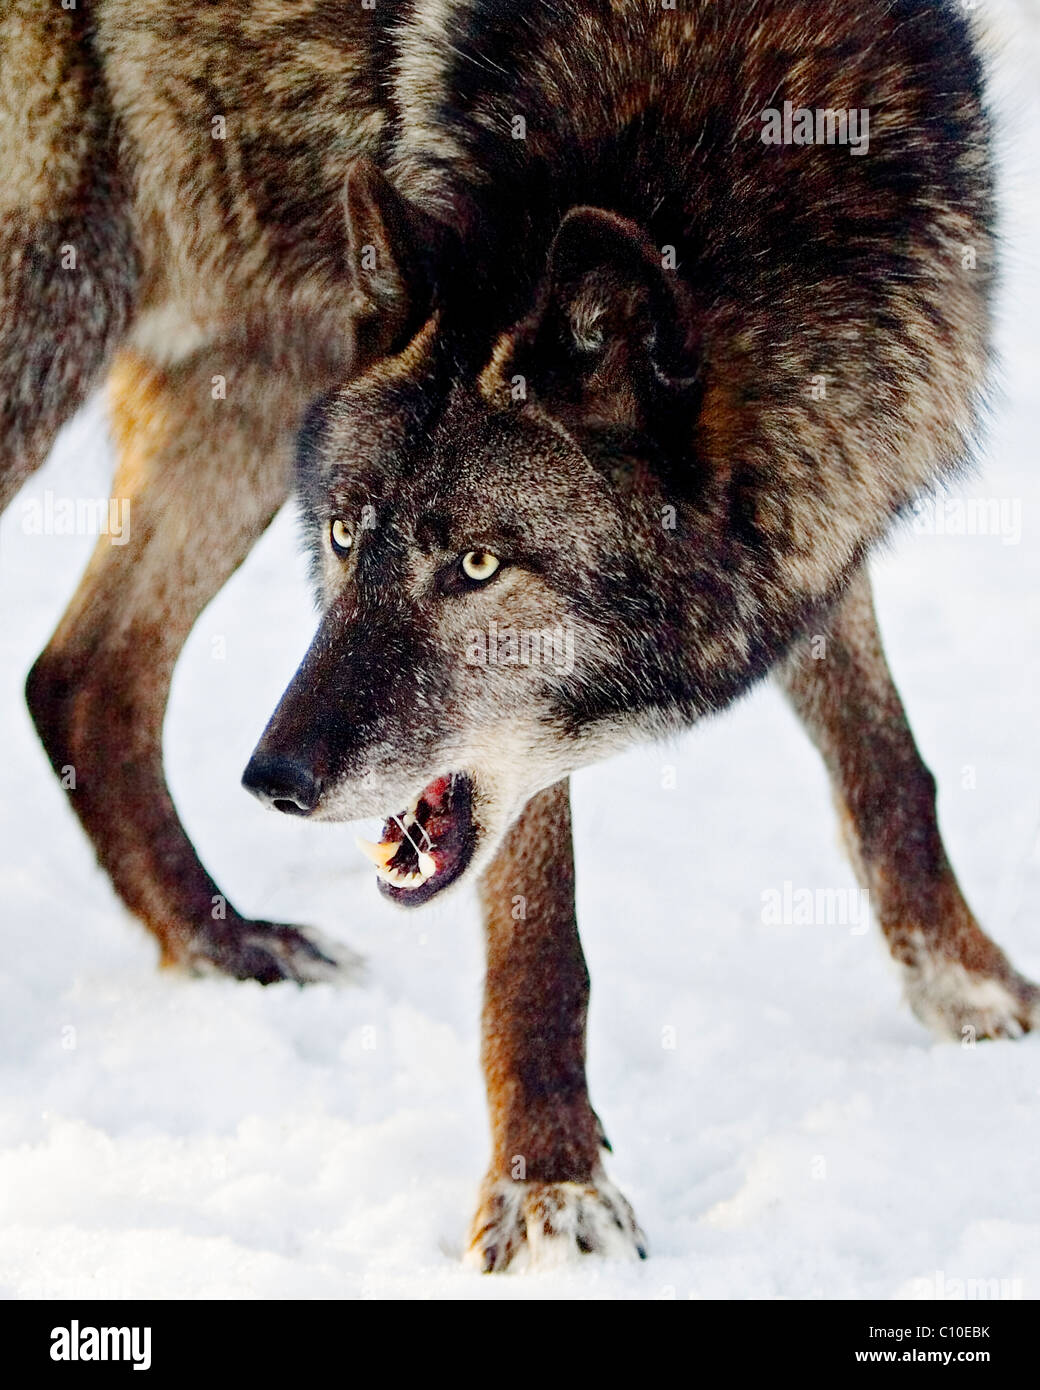 WOLF, BLACK SNARLING Stock Photo